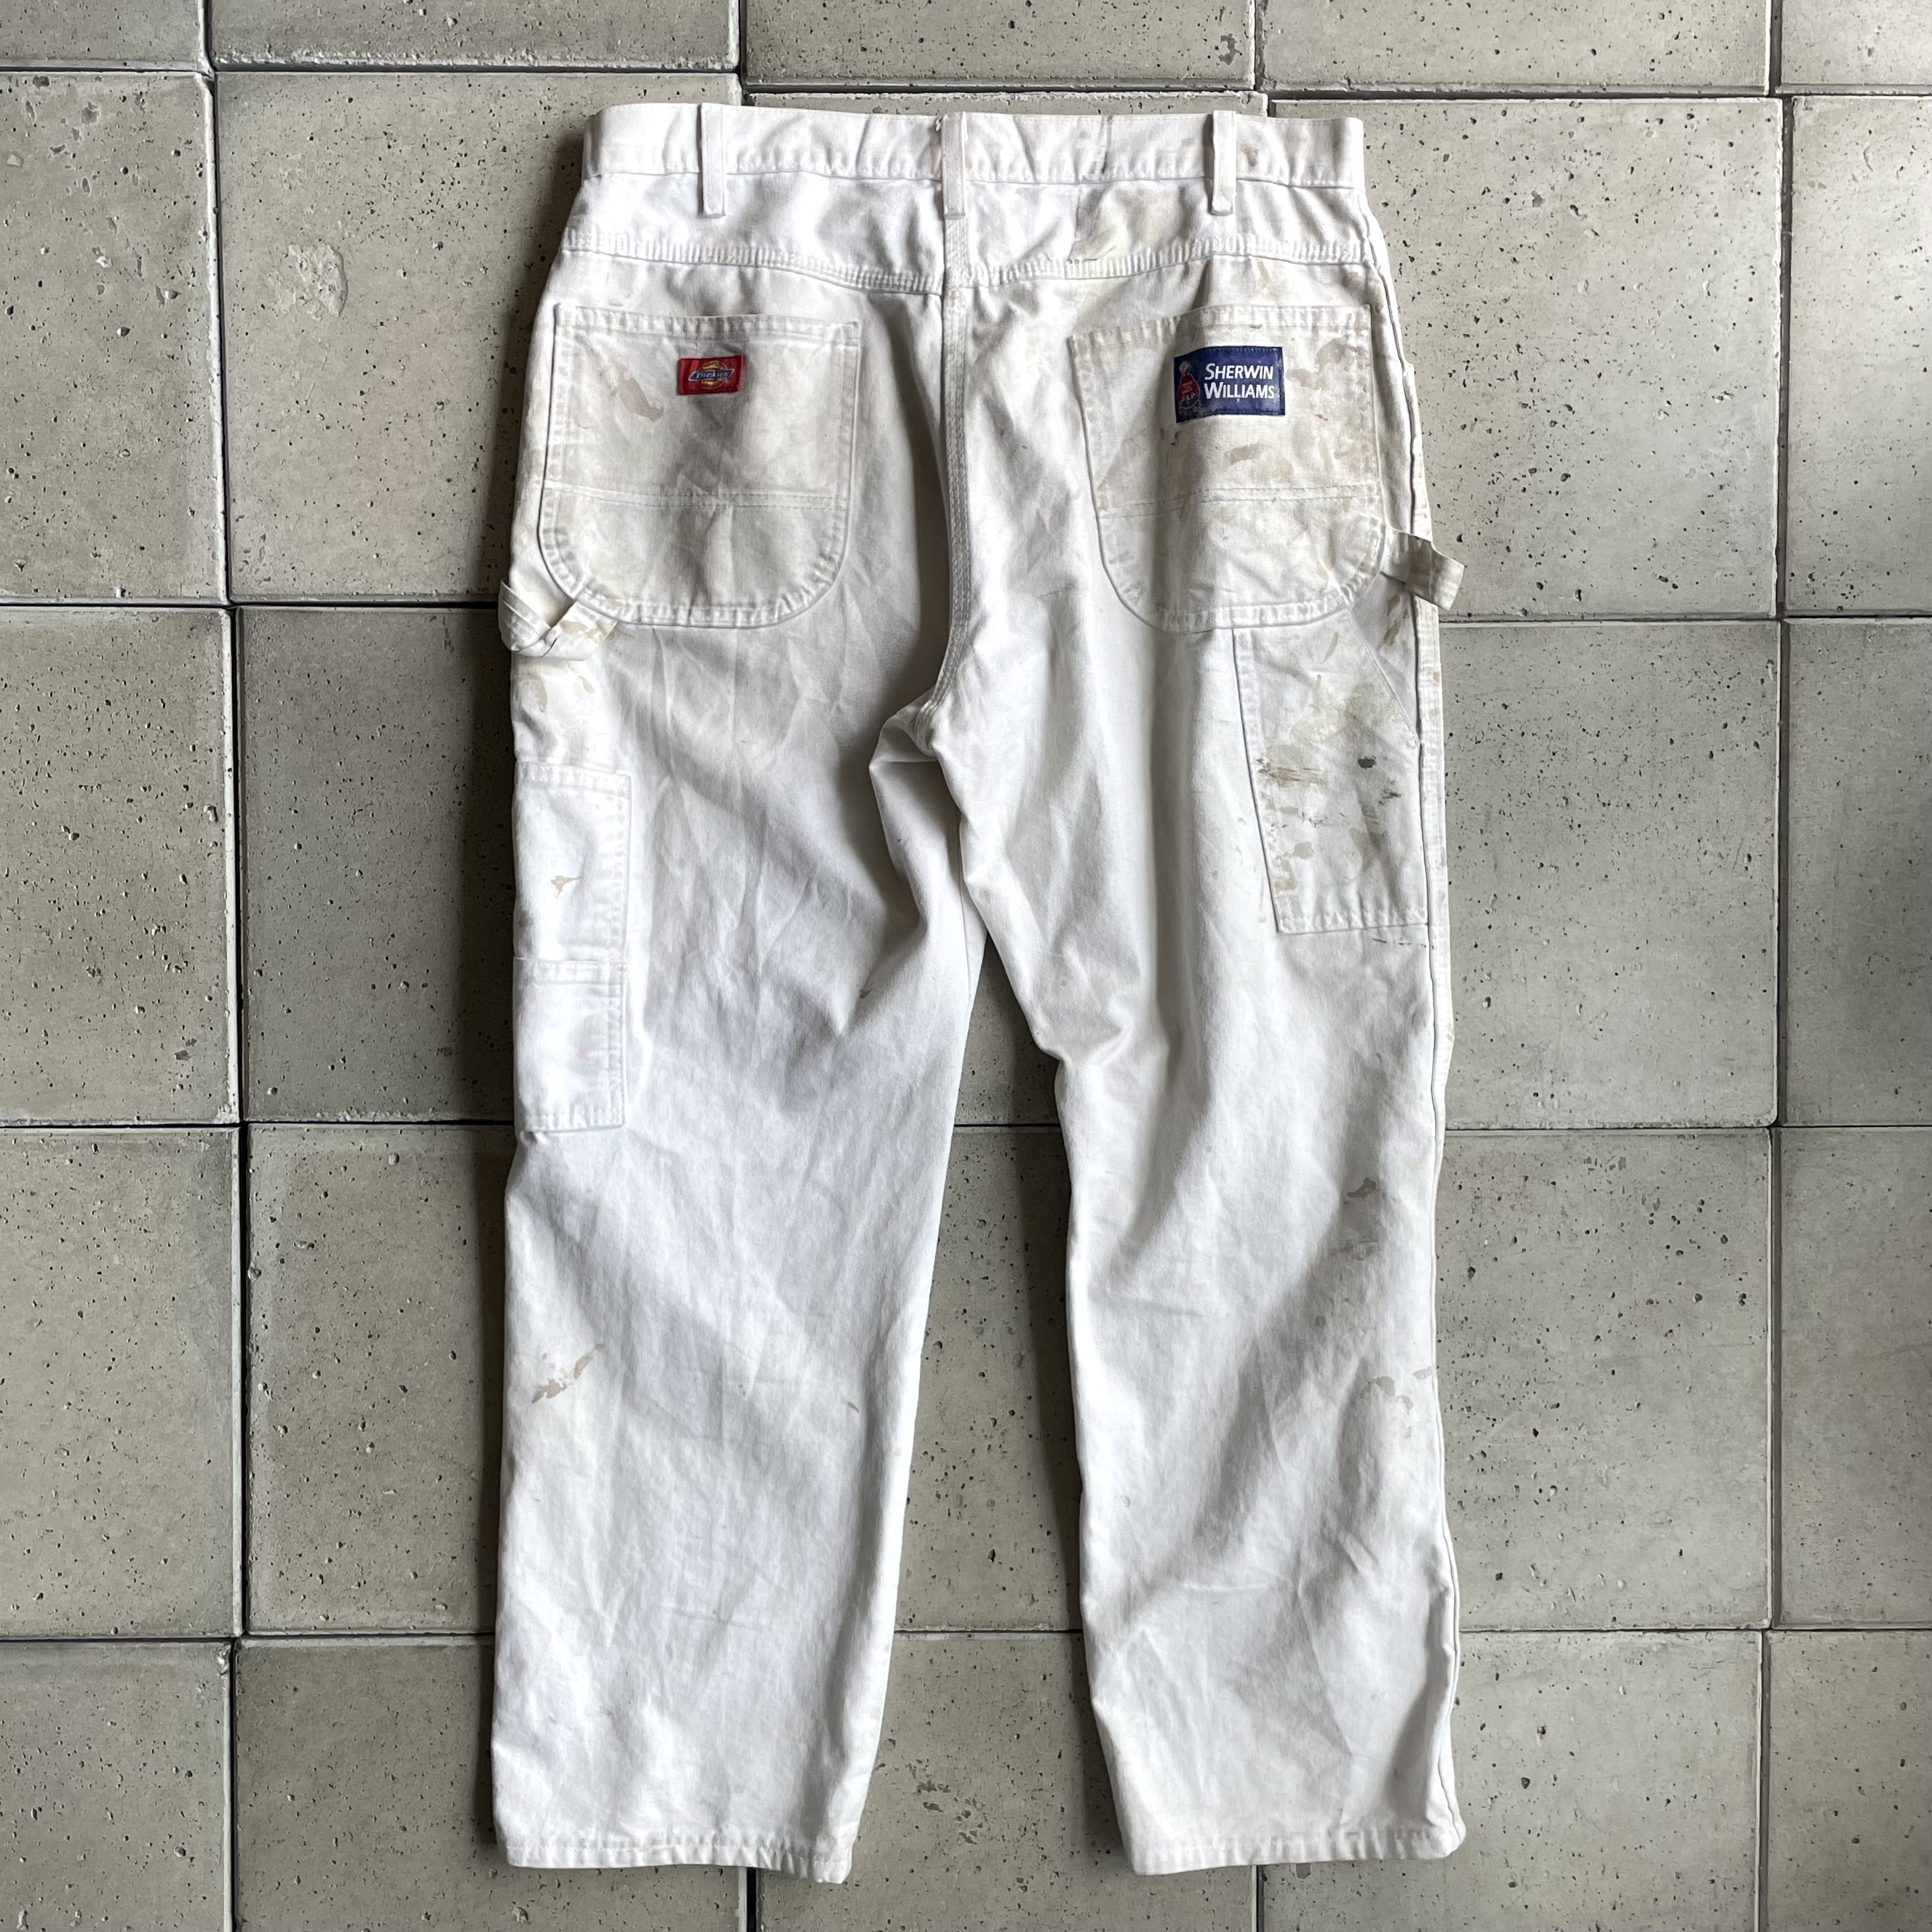 DICKIES SHERWIN WILLIAMS Painted Painter Pants 】size- 36 